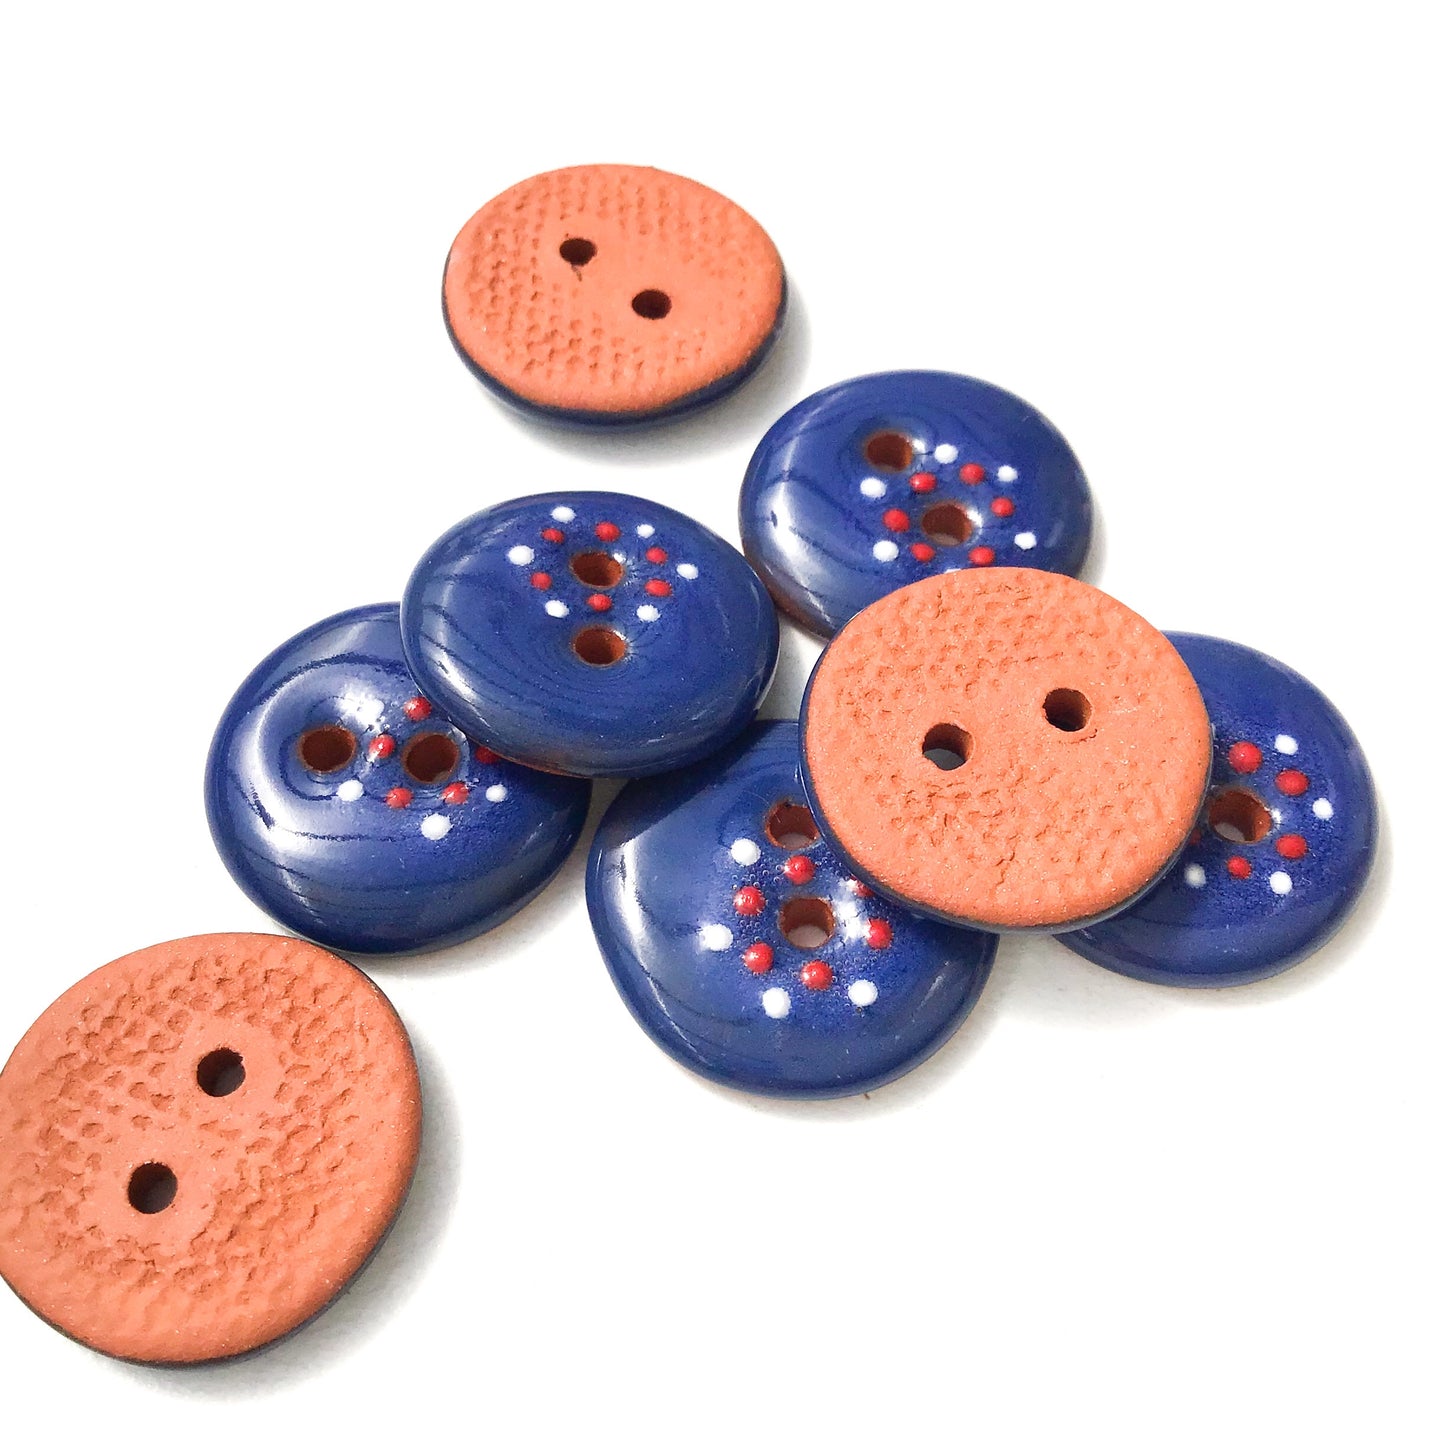 Blue, Red, & White "Spark" Ceramic Buttons - Blue Clay Buttons - 5/8" - 8 Pack